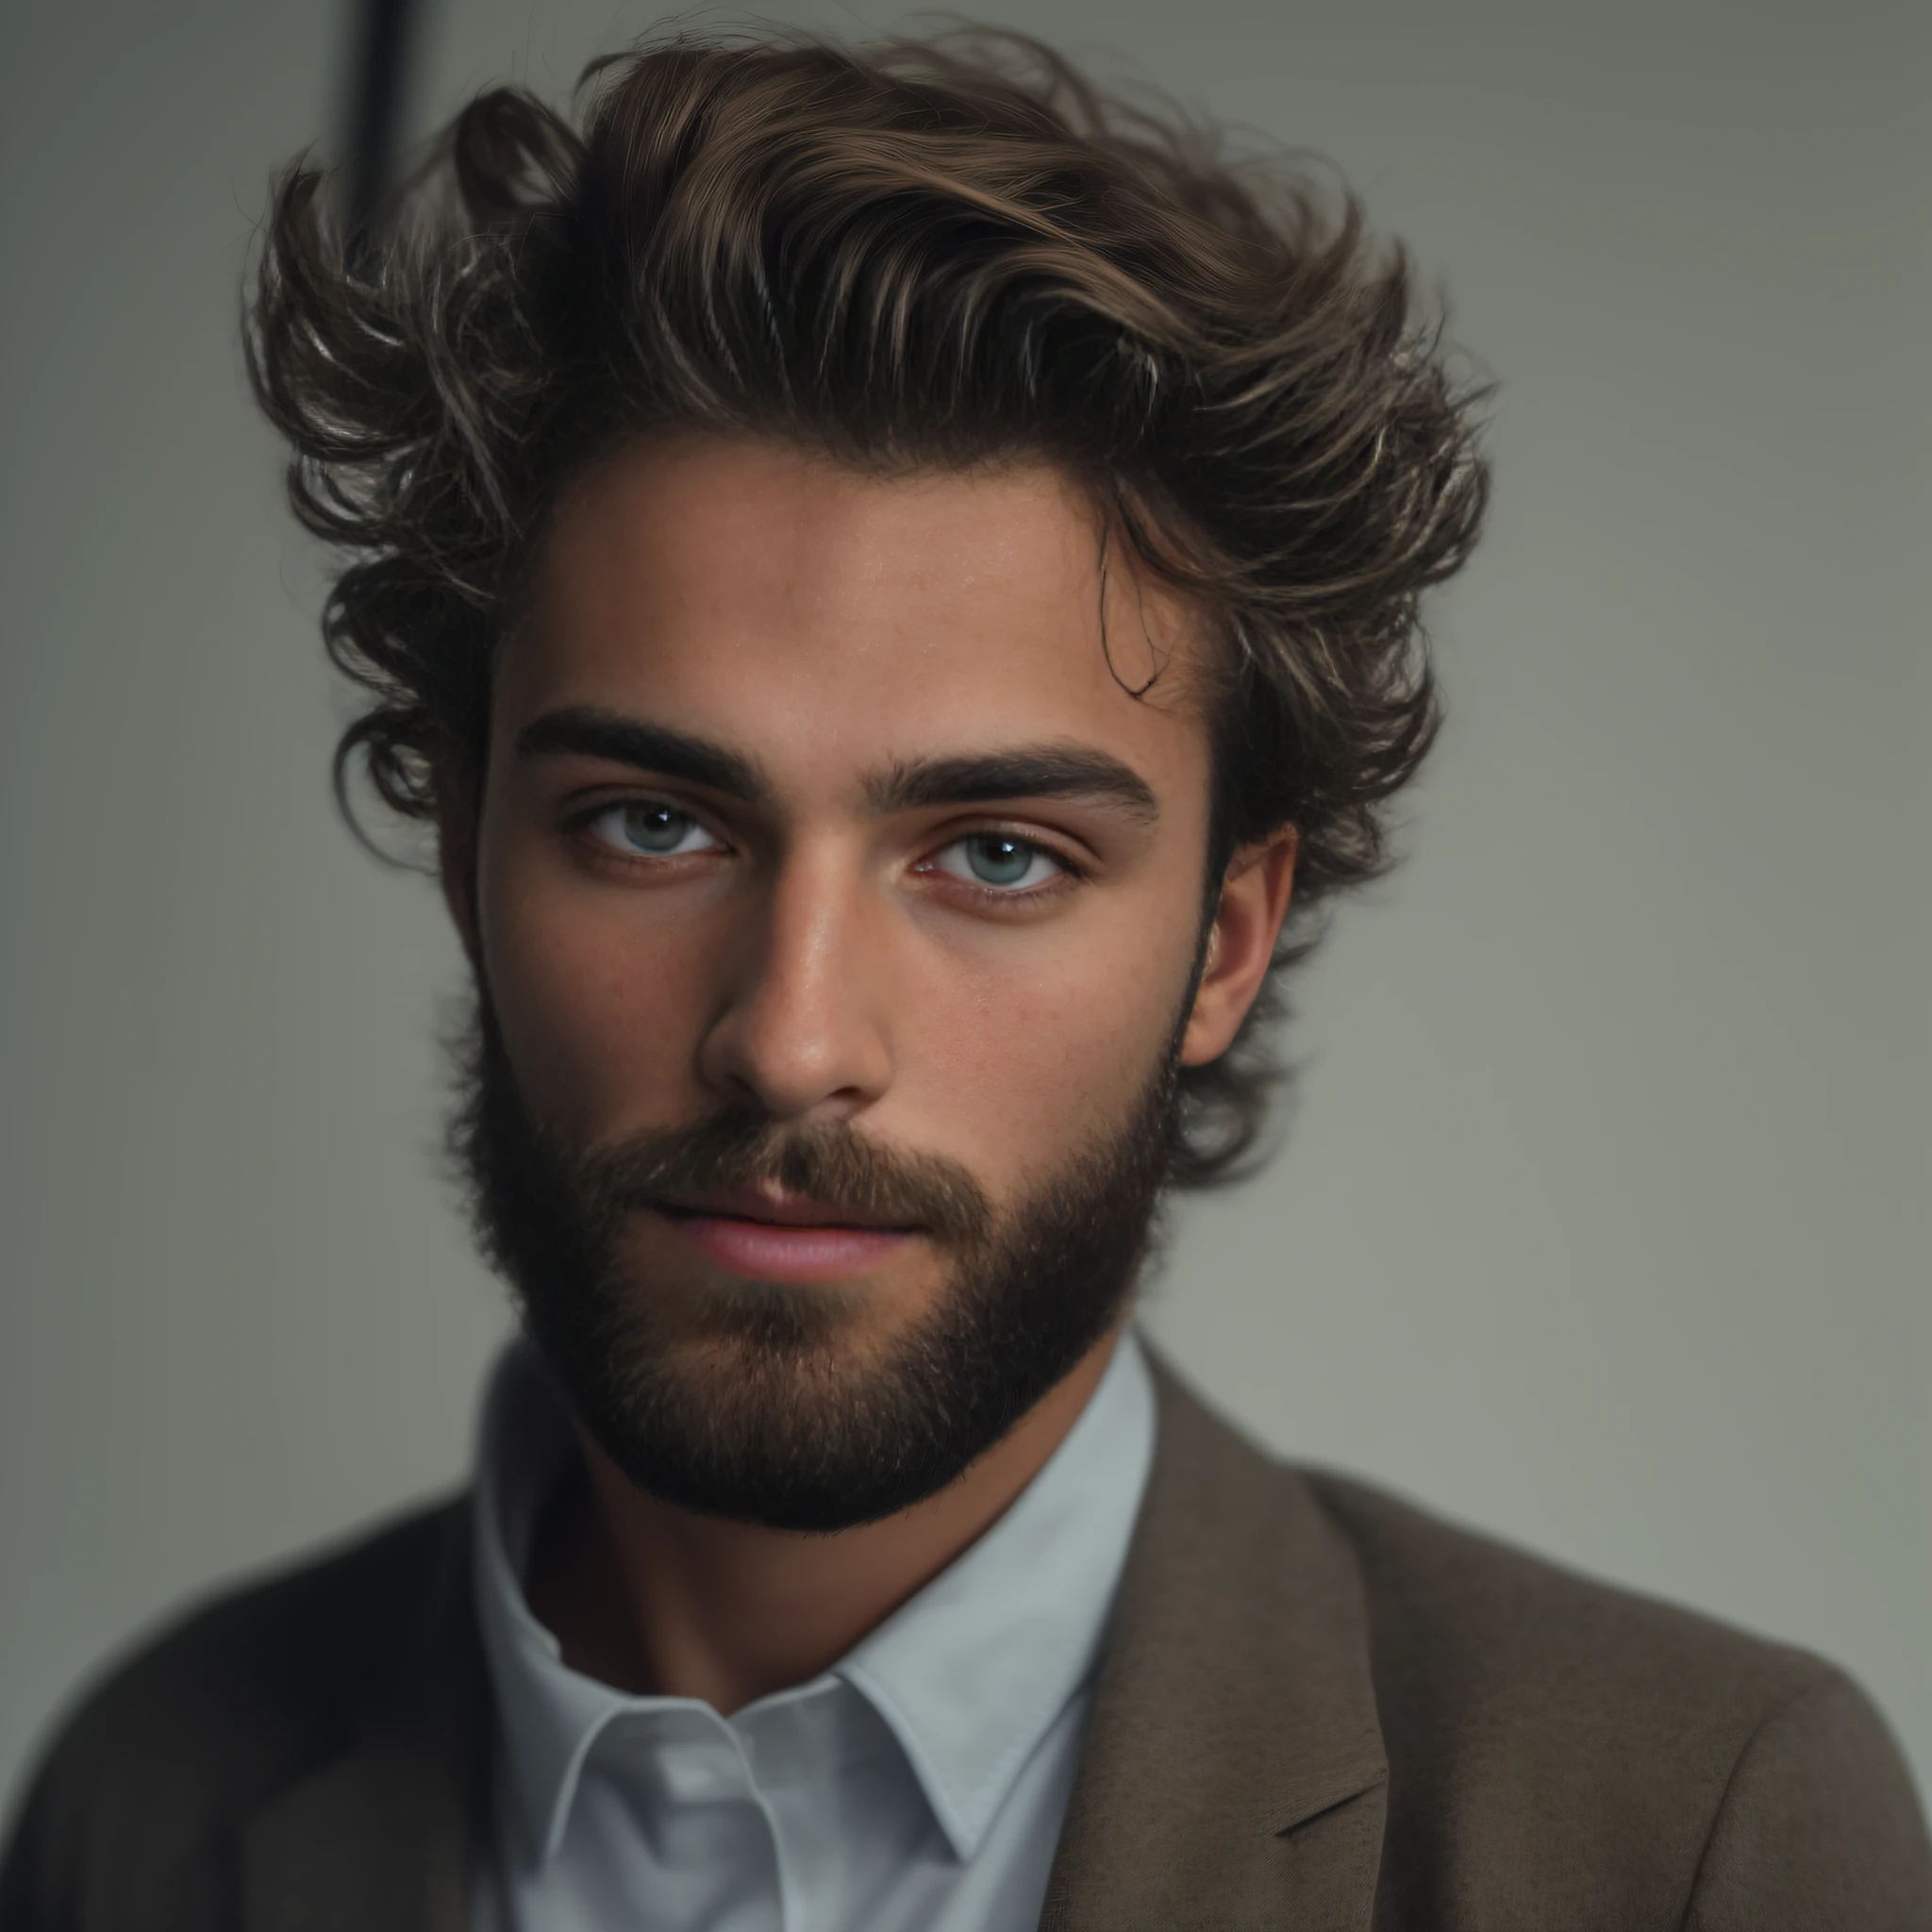 A 23-year-old man from Netherlands, masculine, bearded, full beard, role model, fully body, elegant pose, Very beauthful, looking-into-camera, detailled image, uhd, 8K, well-lit, grain of film, perfect  lighting